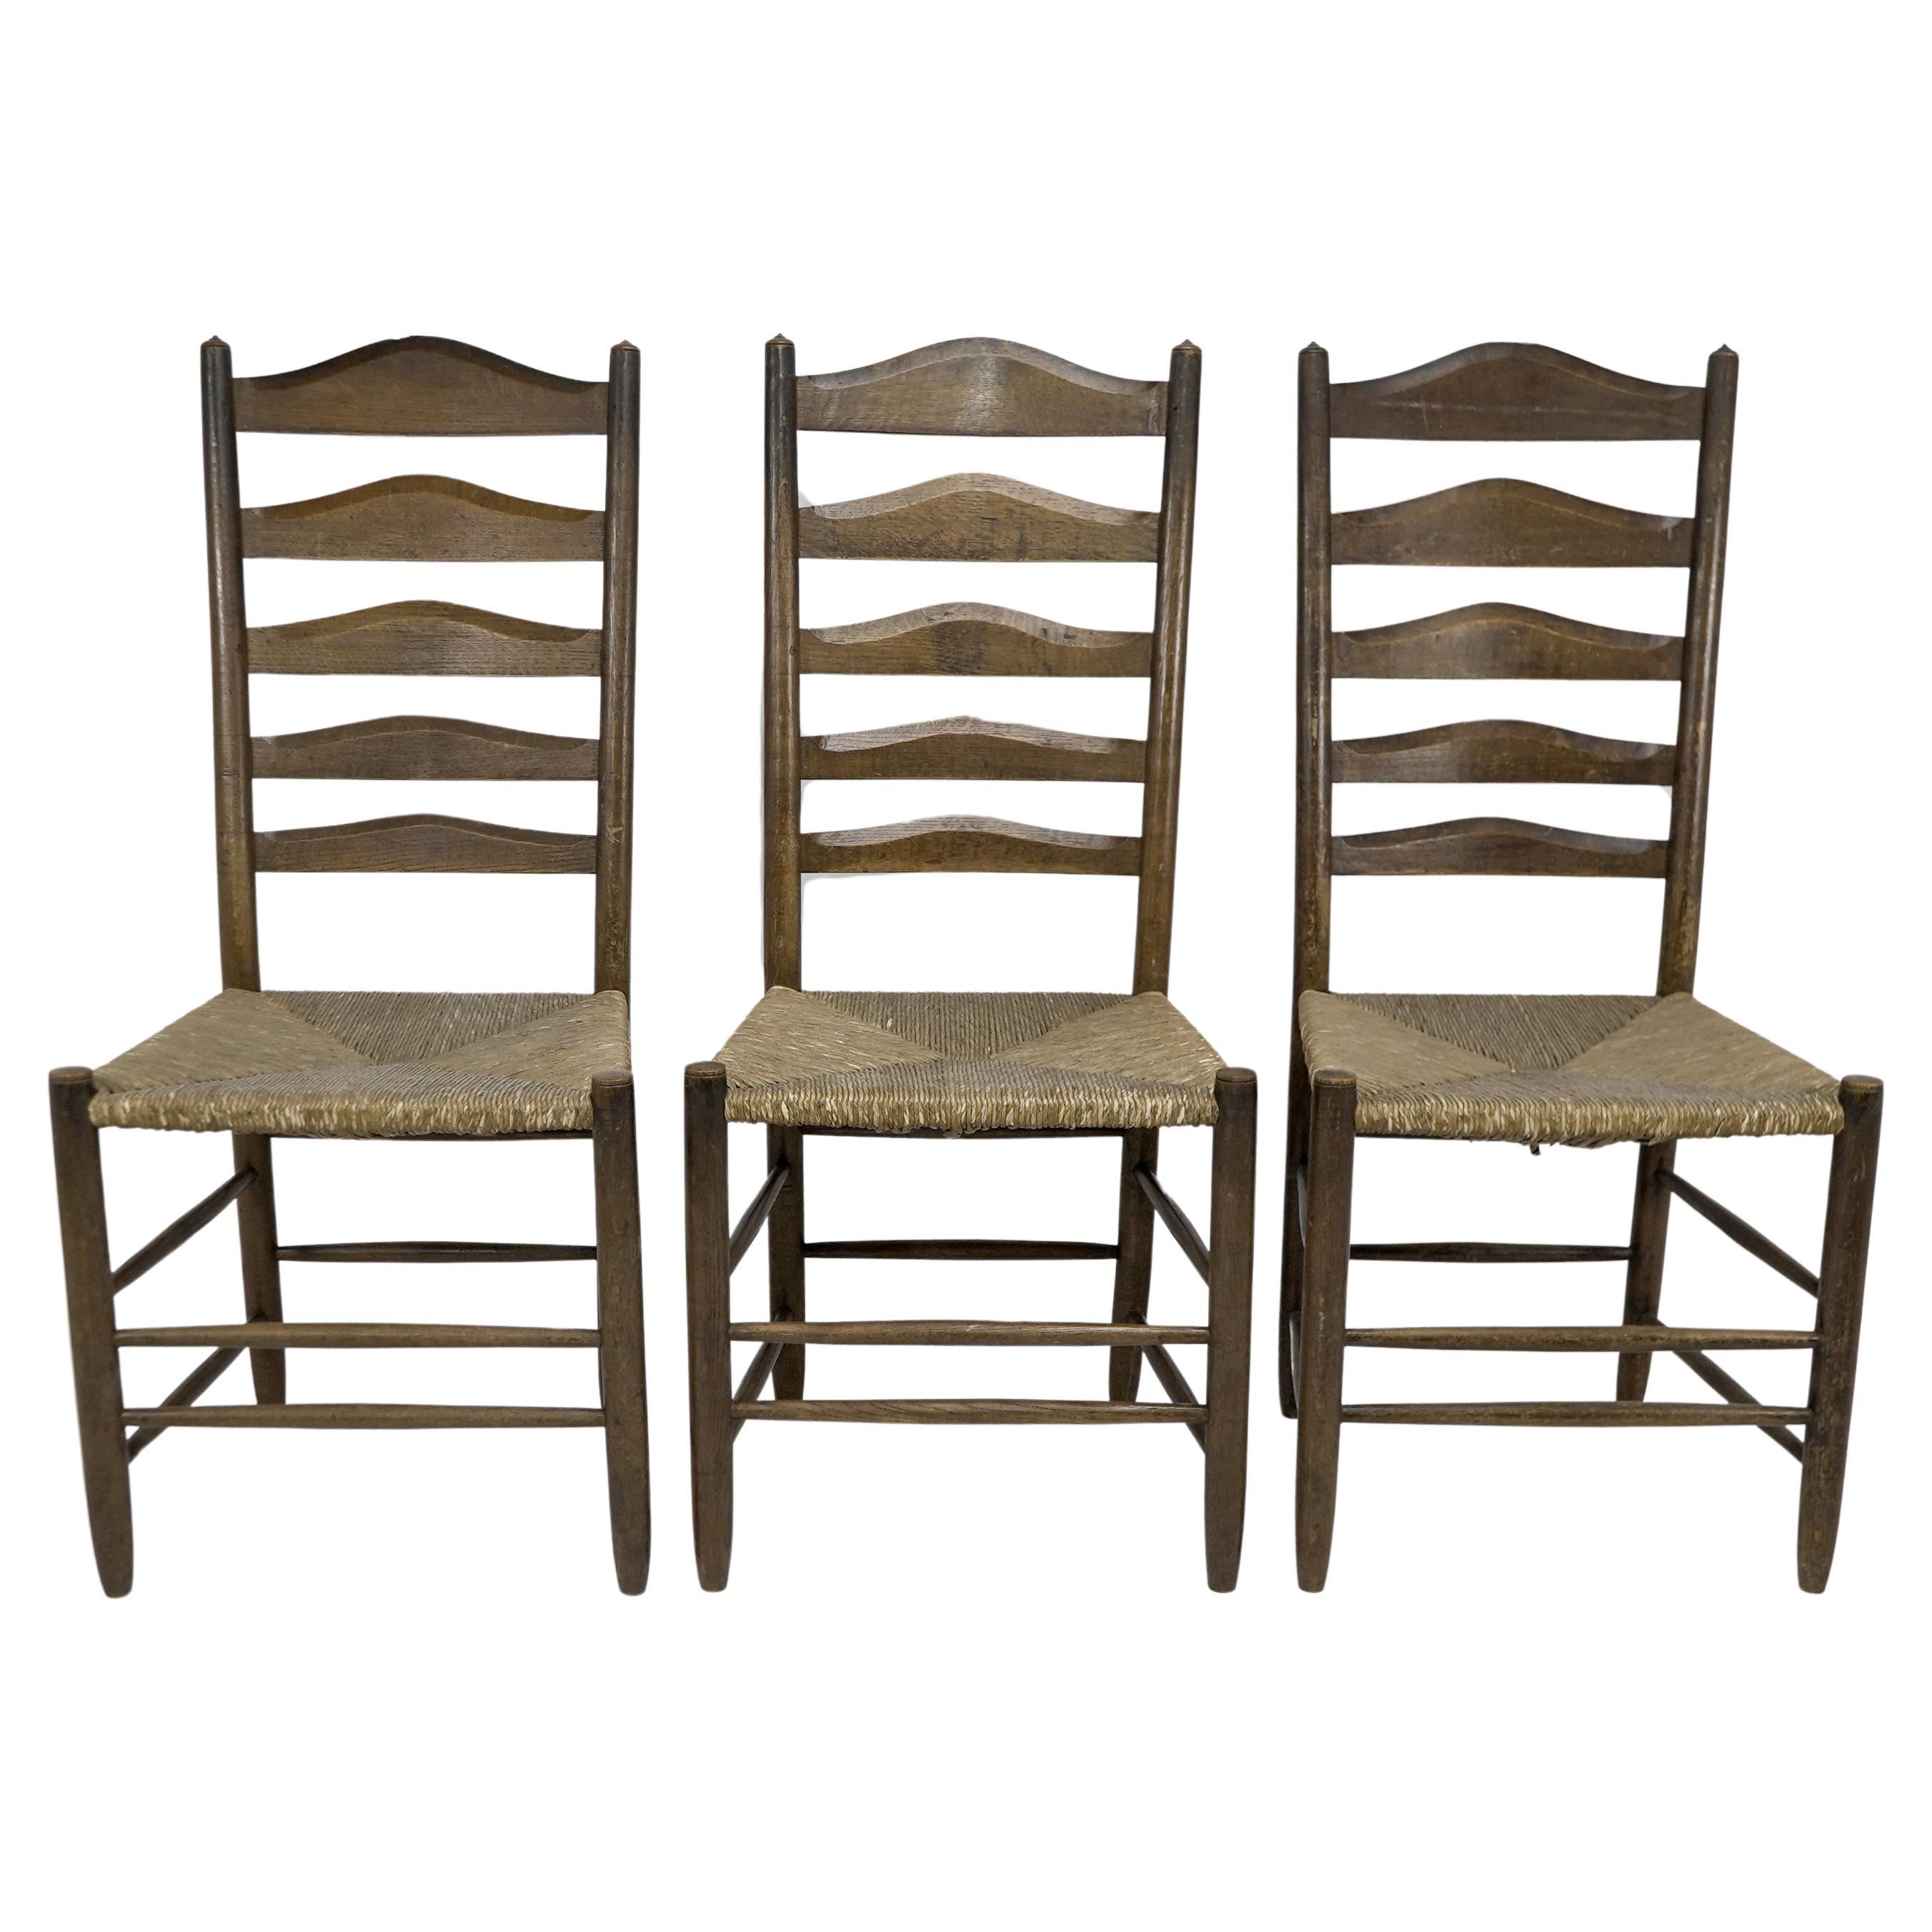 Manner of E Gimson. A set of three lovely quality oak ladderback dining chairs